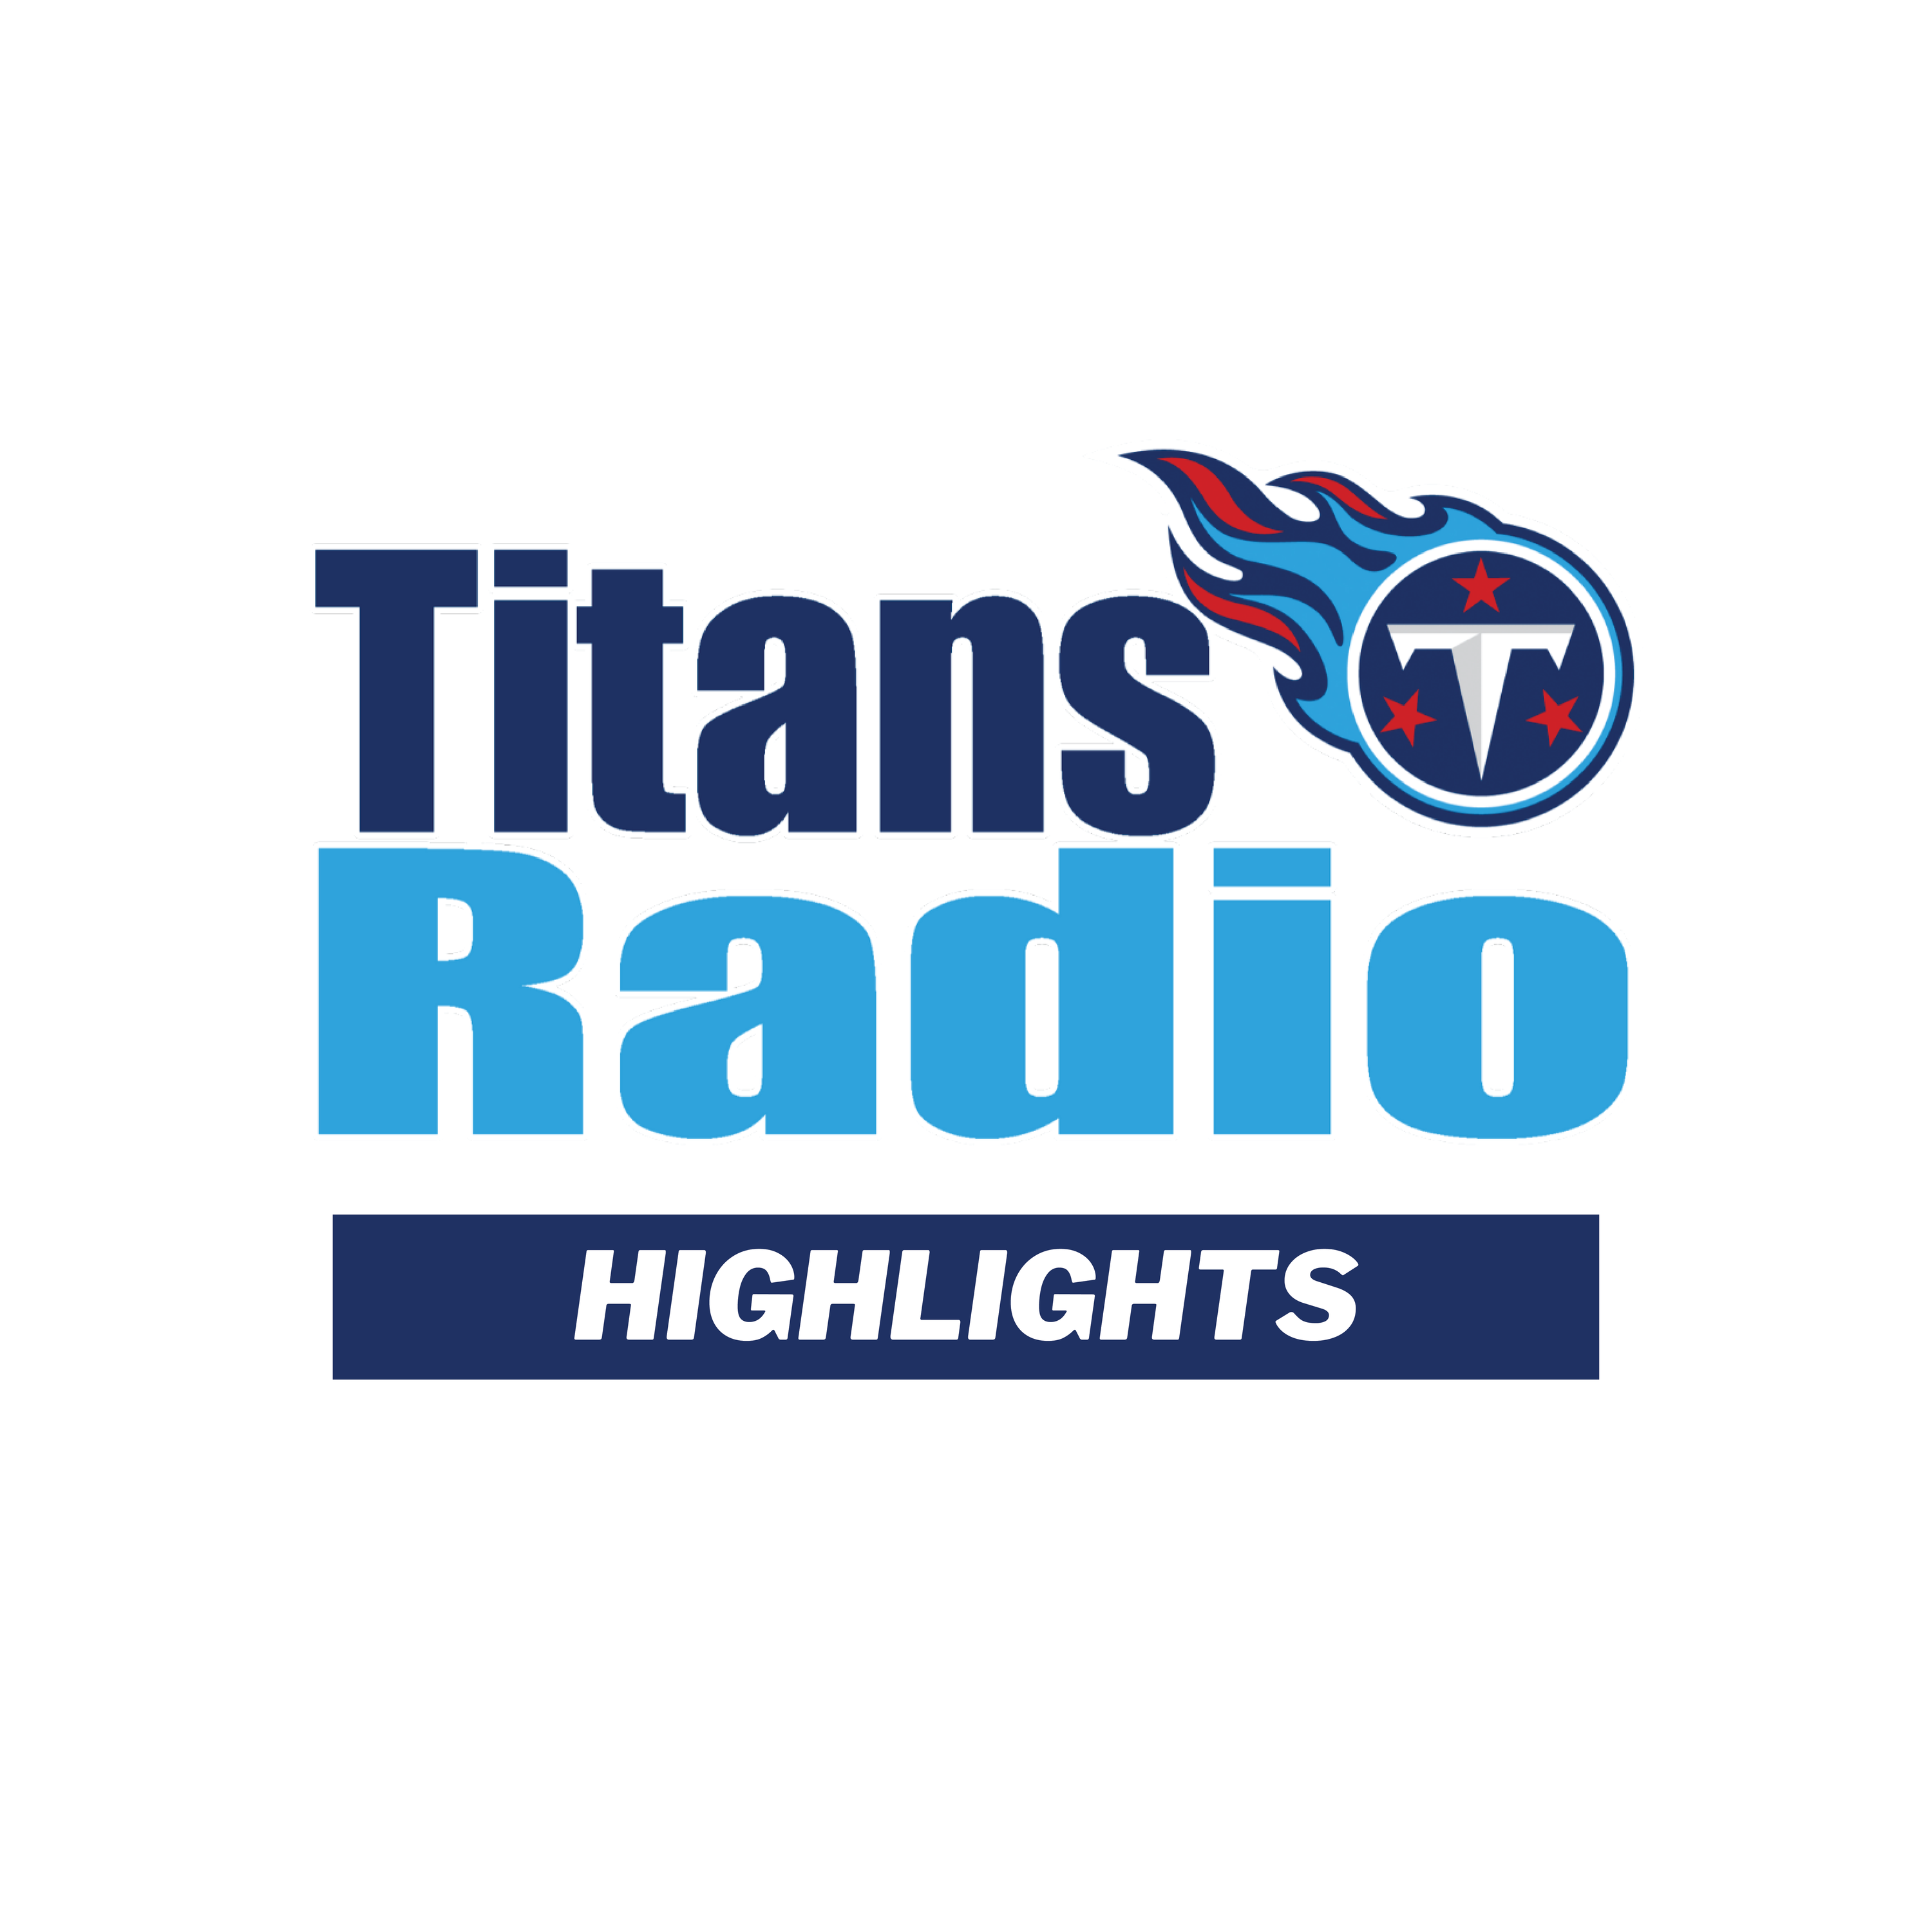 Titans Knocks Jaguars Out of Playoffs with 28-20 Win